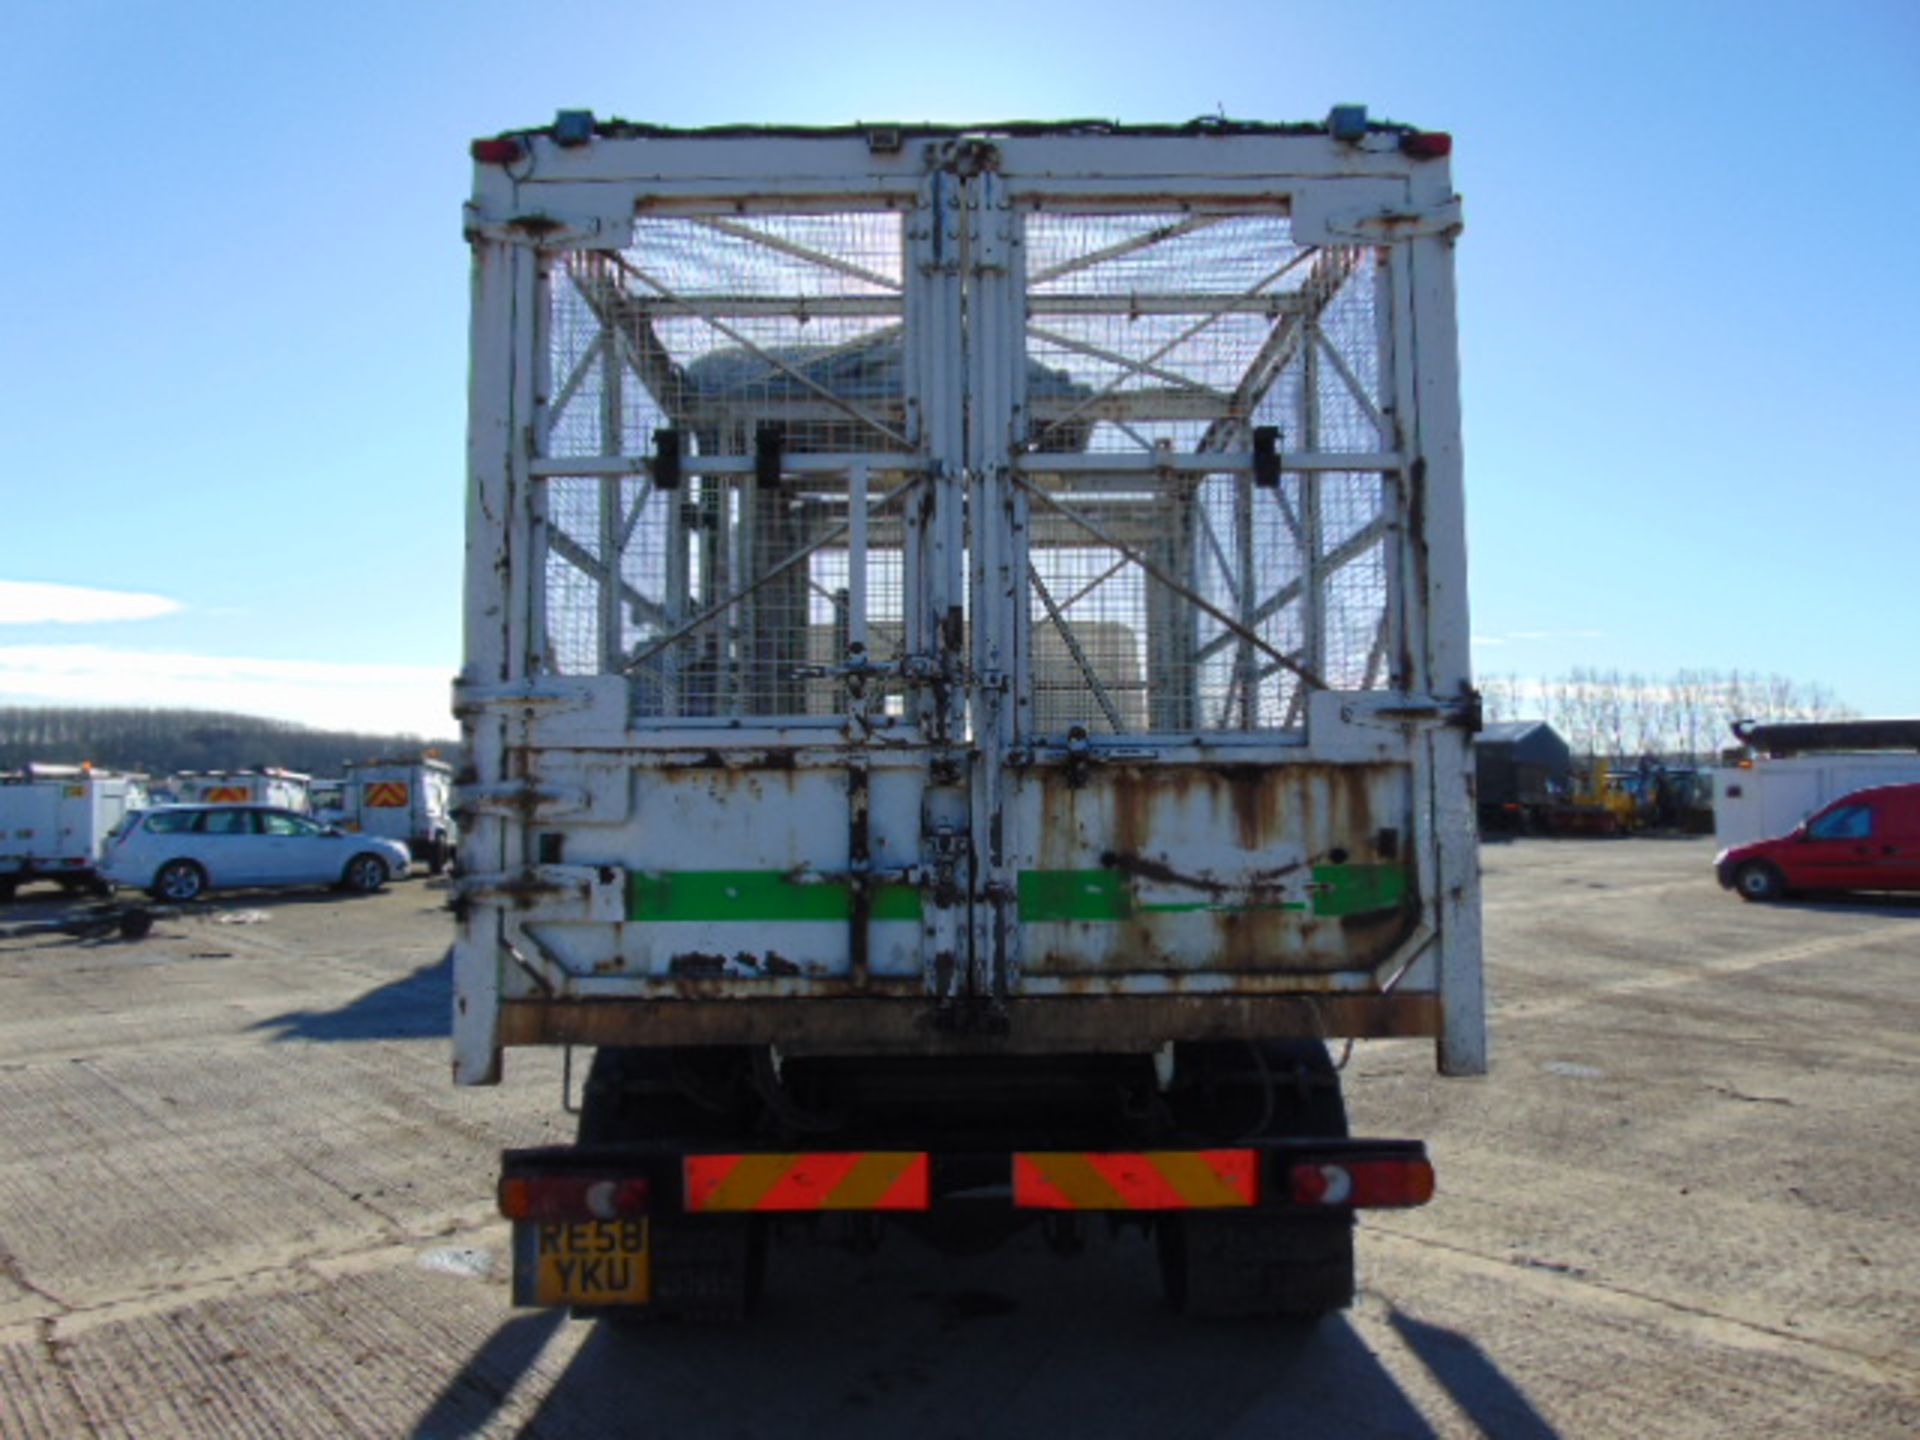 2008 DAF LF 45.140 C/W Refuse Cage, Rear Tipping Body and Side Bin Lift - Image 10 of 26